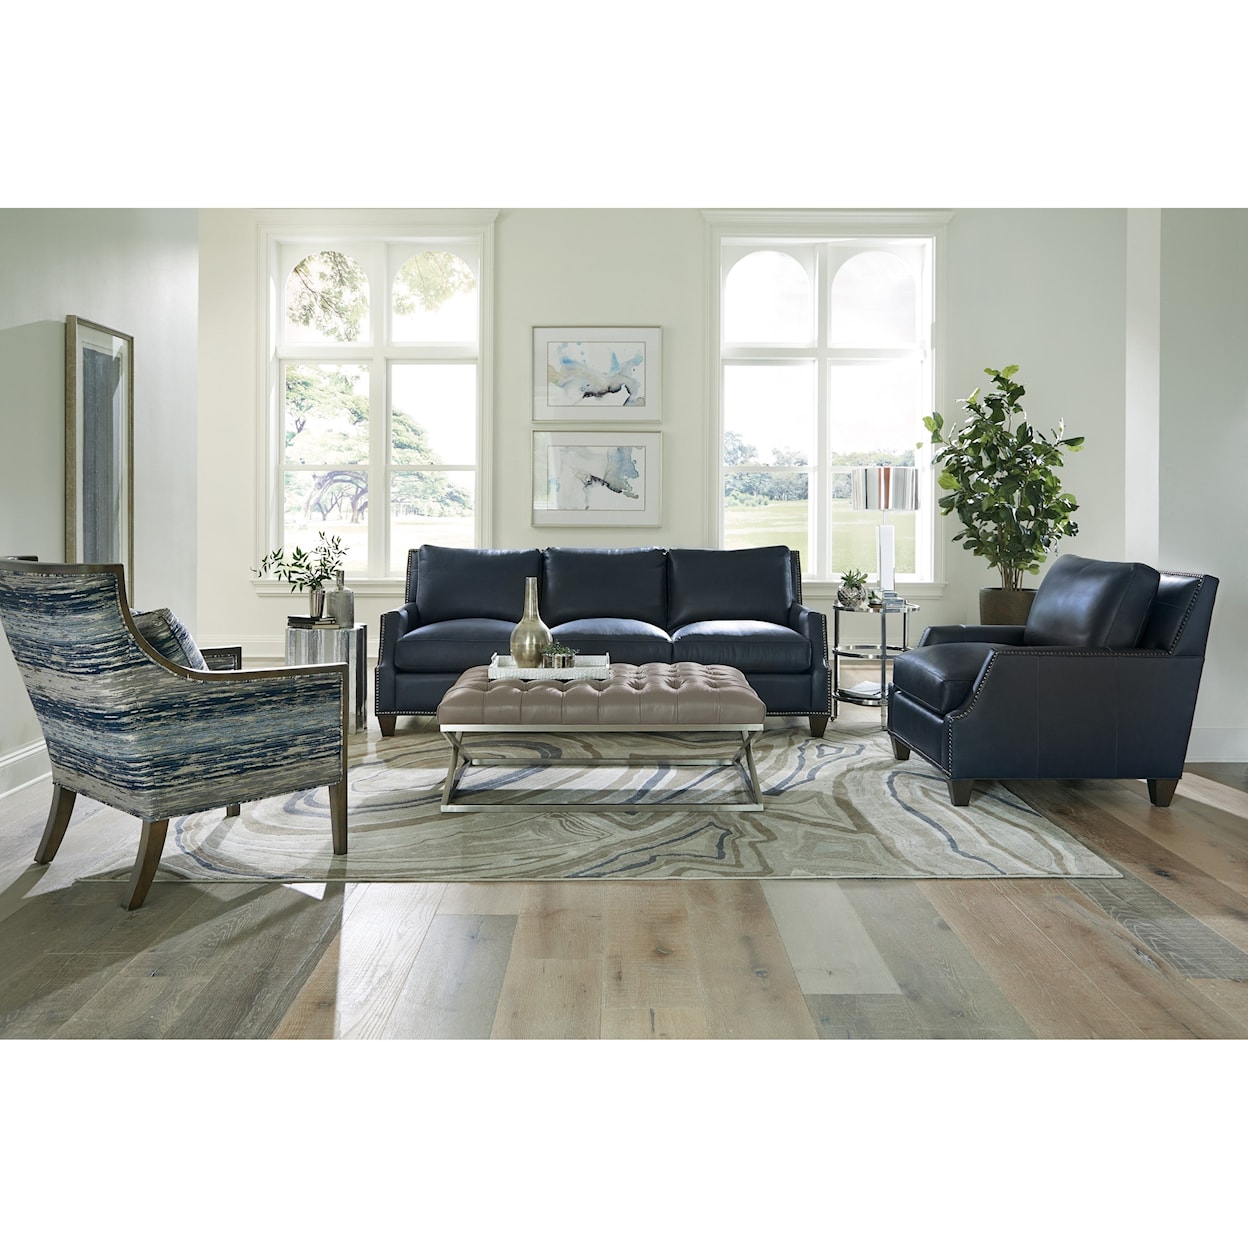 Craftmaster L790350 Living Room Group